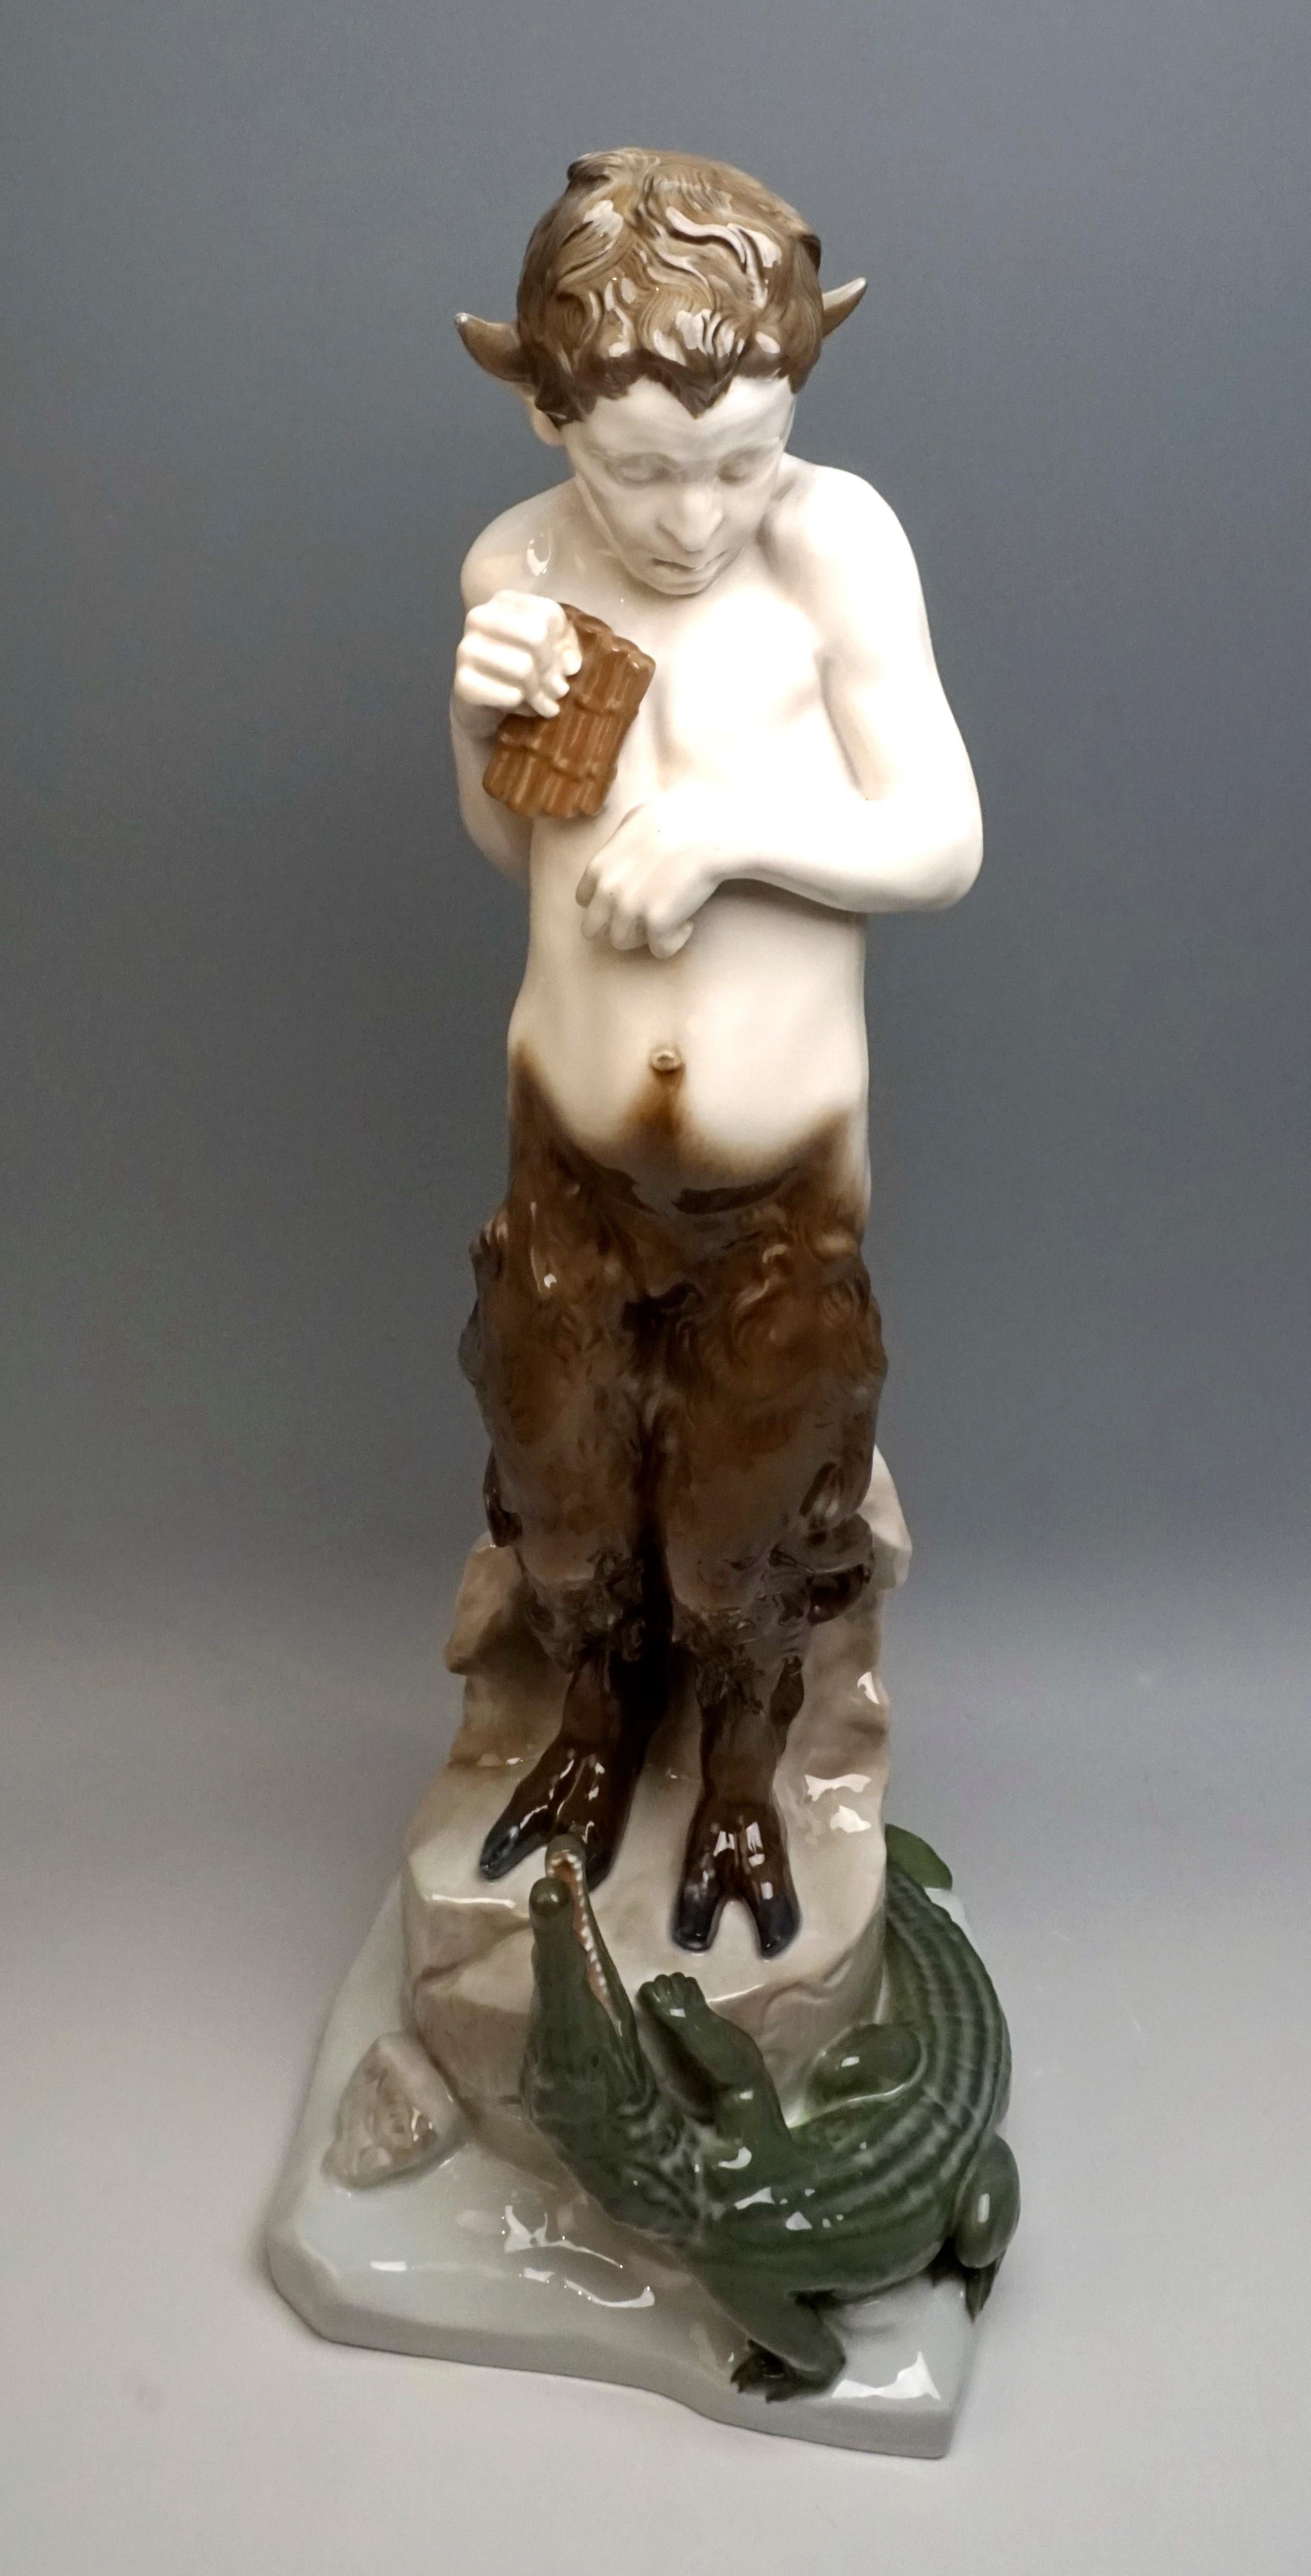 Hand-Painted Very Large Porcelain Figure Faun with Crocodile Rosenthal Selb, Germany